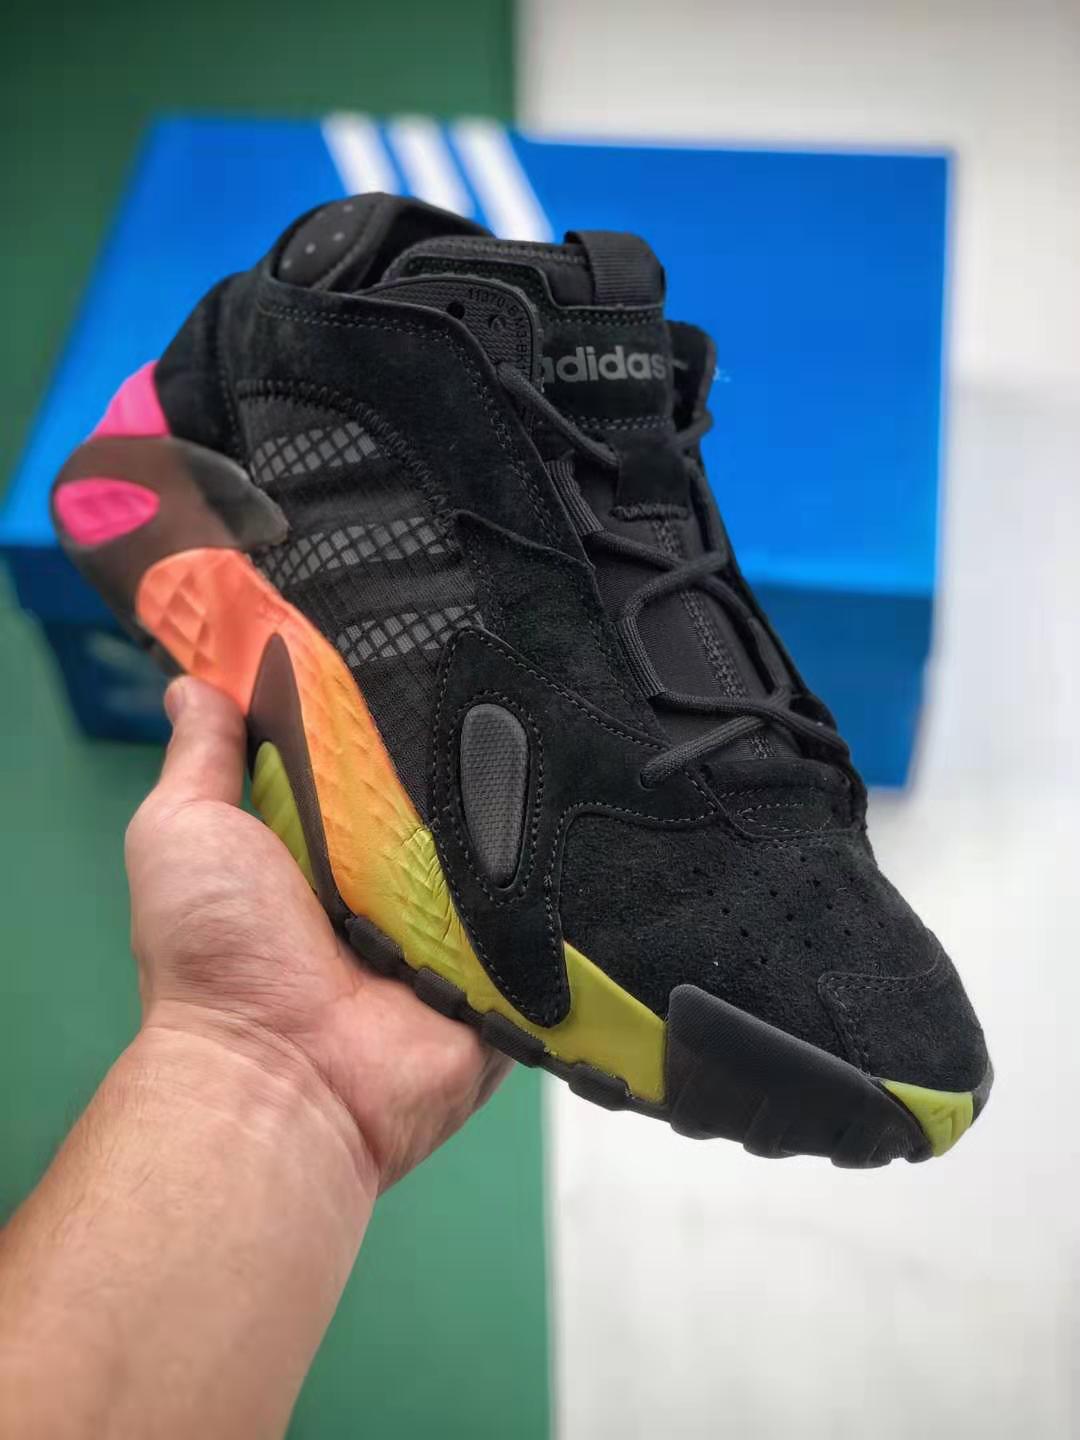 Adidas Streetball Black Multicolor EF1906 – Performance with Style!